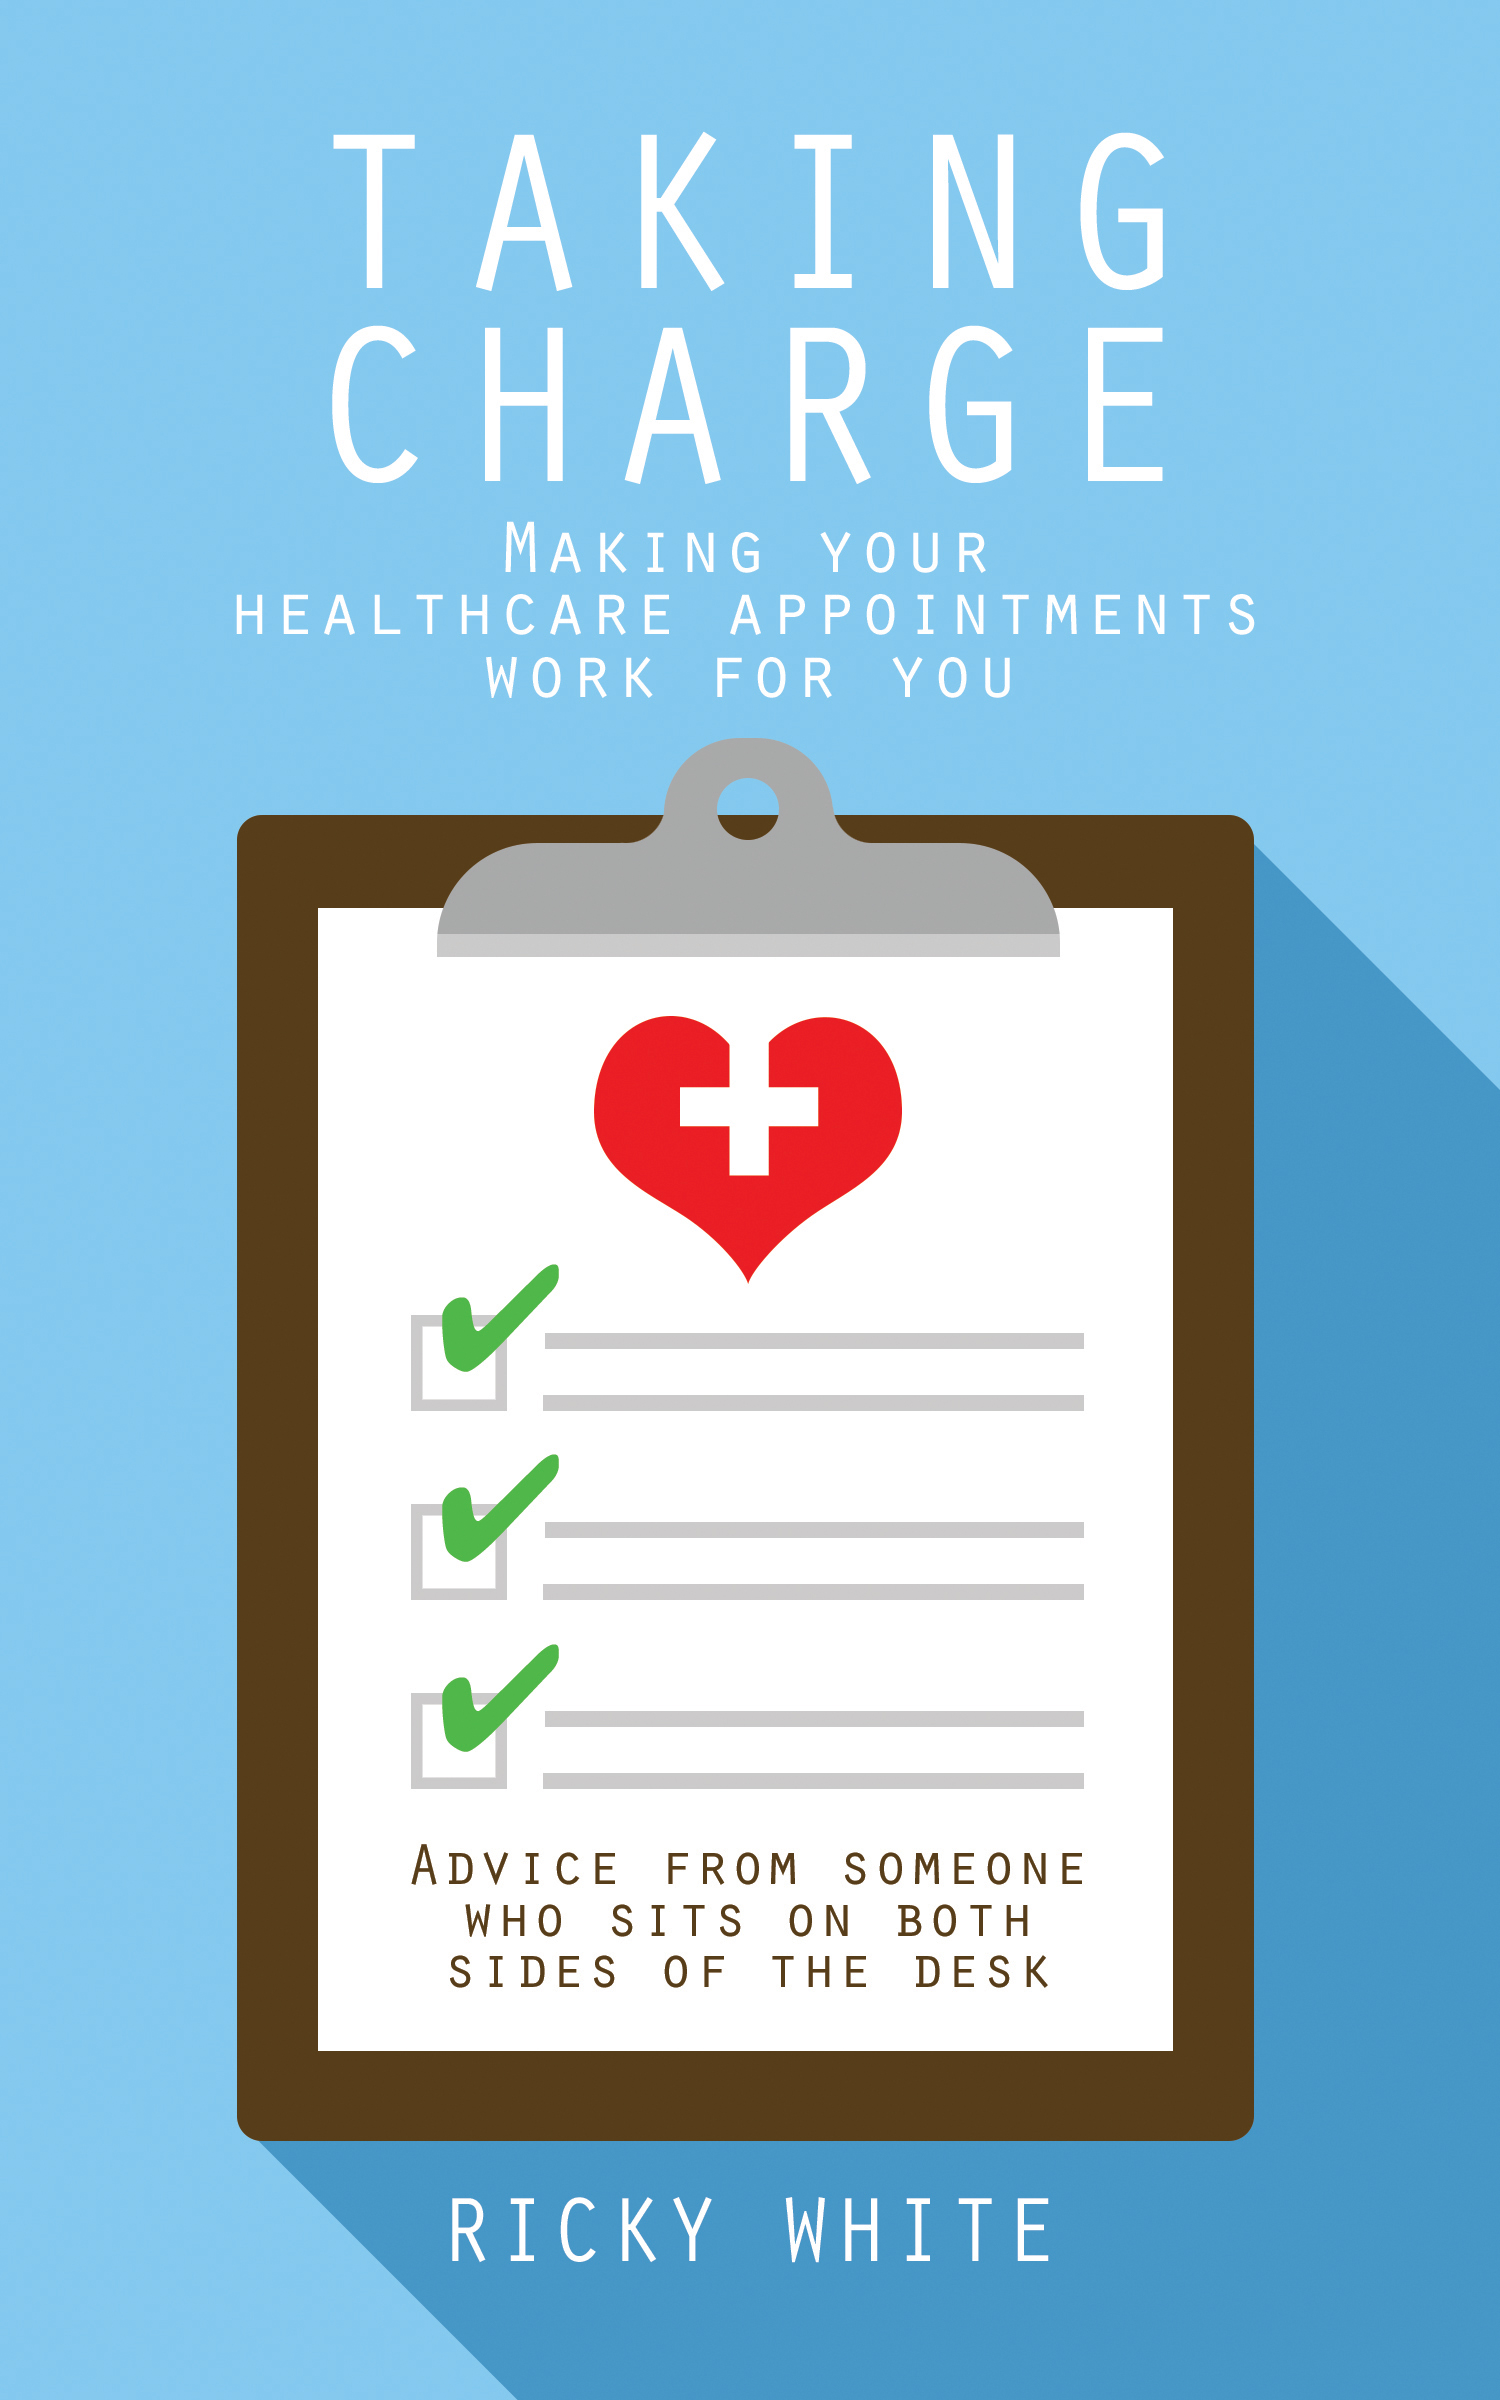 FREE: Taking Charge: Making Your Healthcare Appointments Work for You by Ricky White